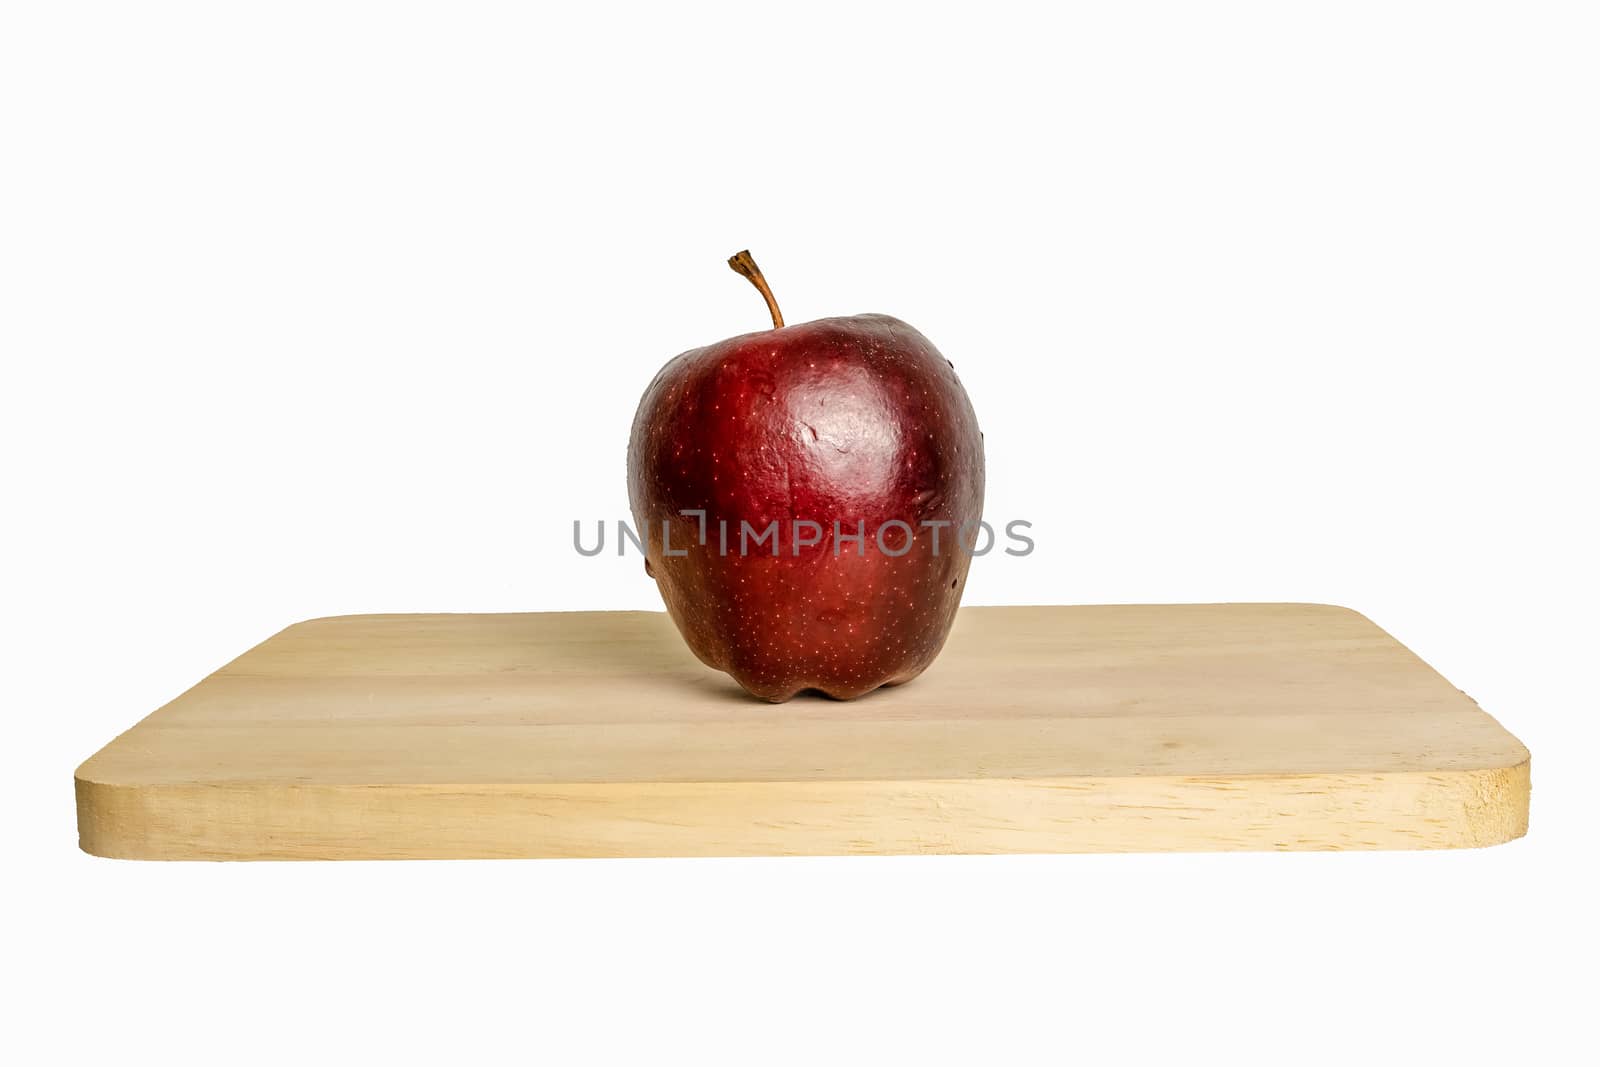 Apple fruit placed on a wooden tray in a white background